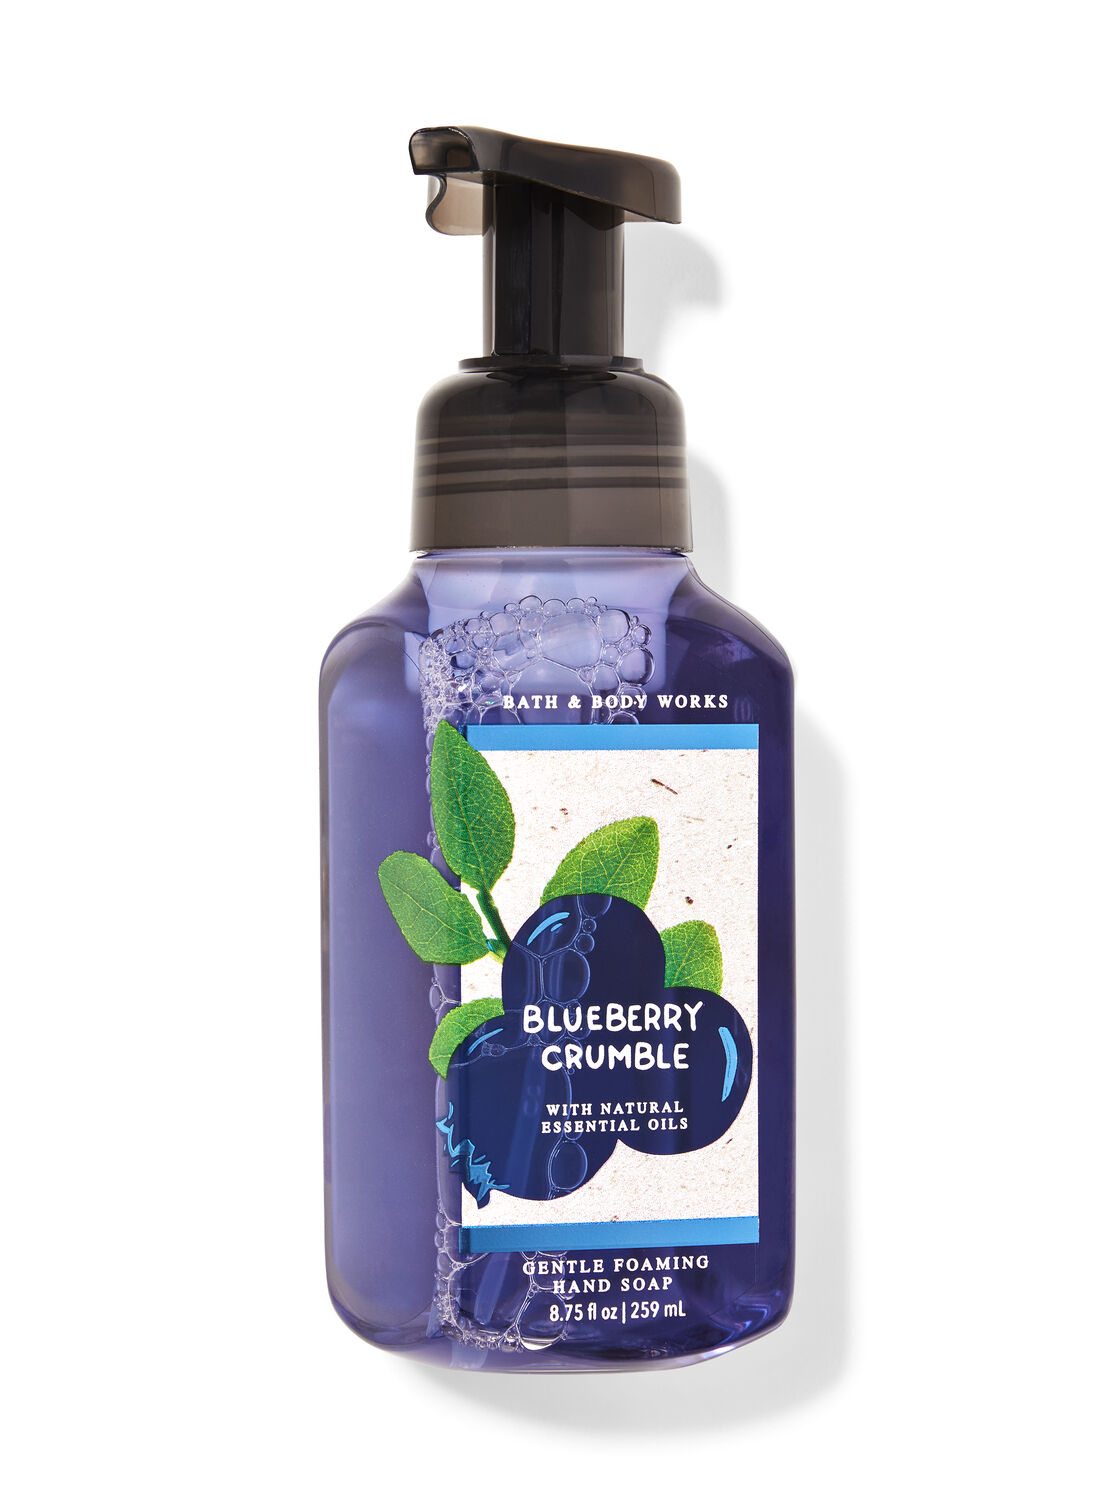 Blueberry Crumble Gentle Foaming Hand Soap